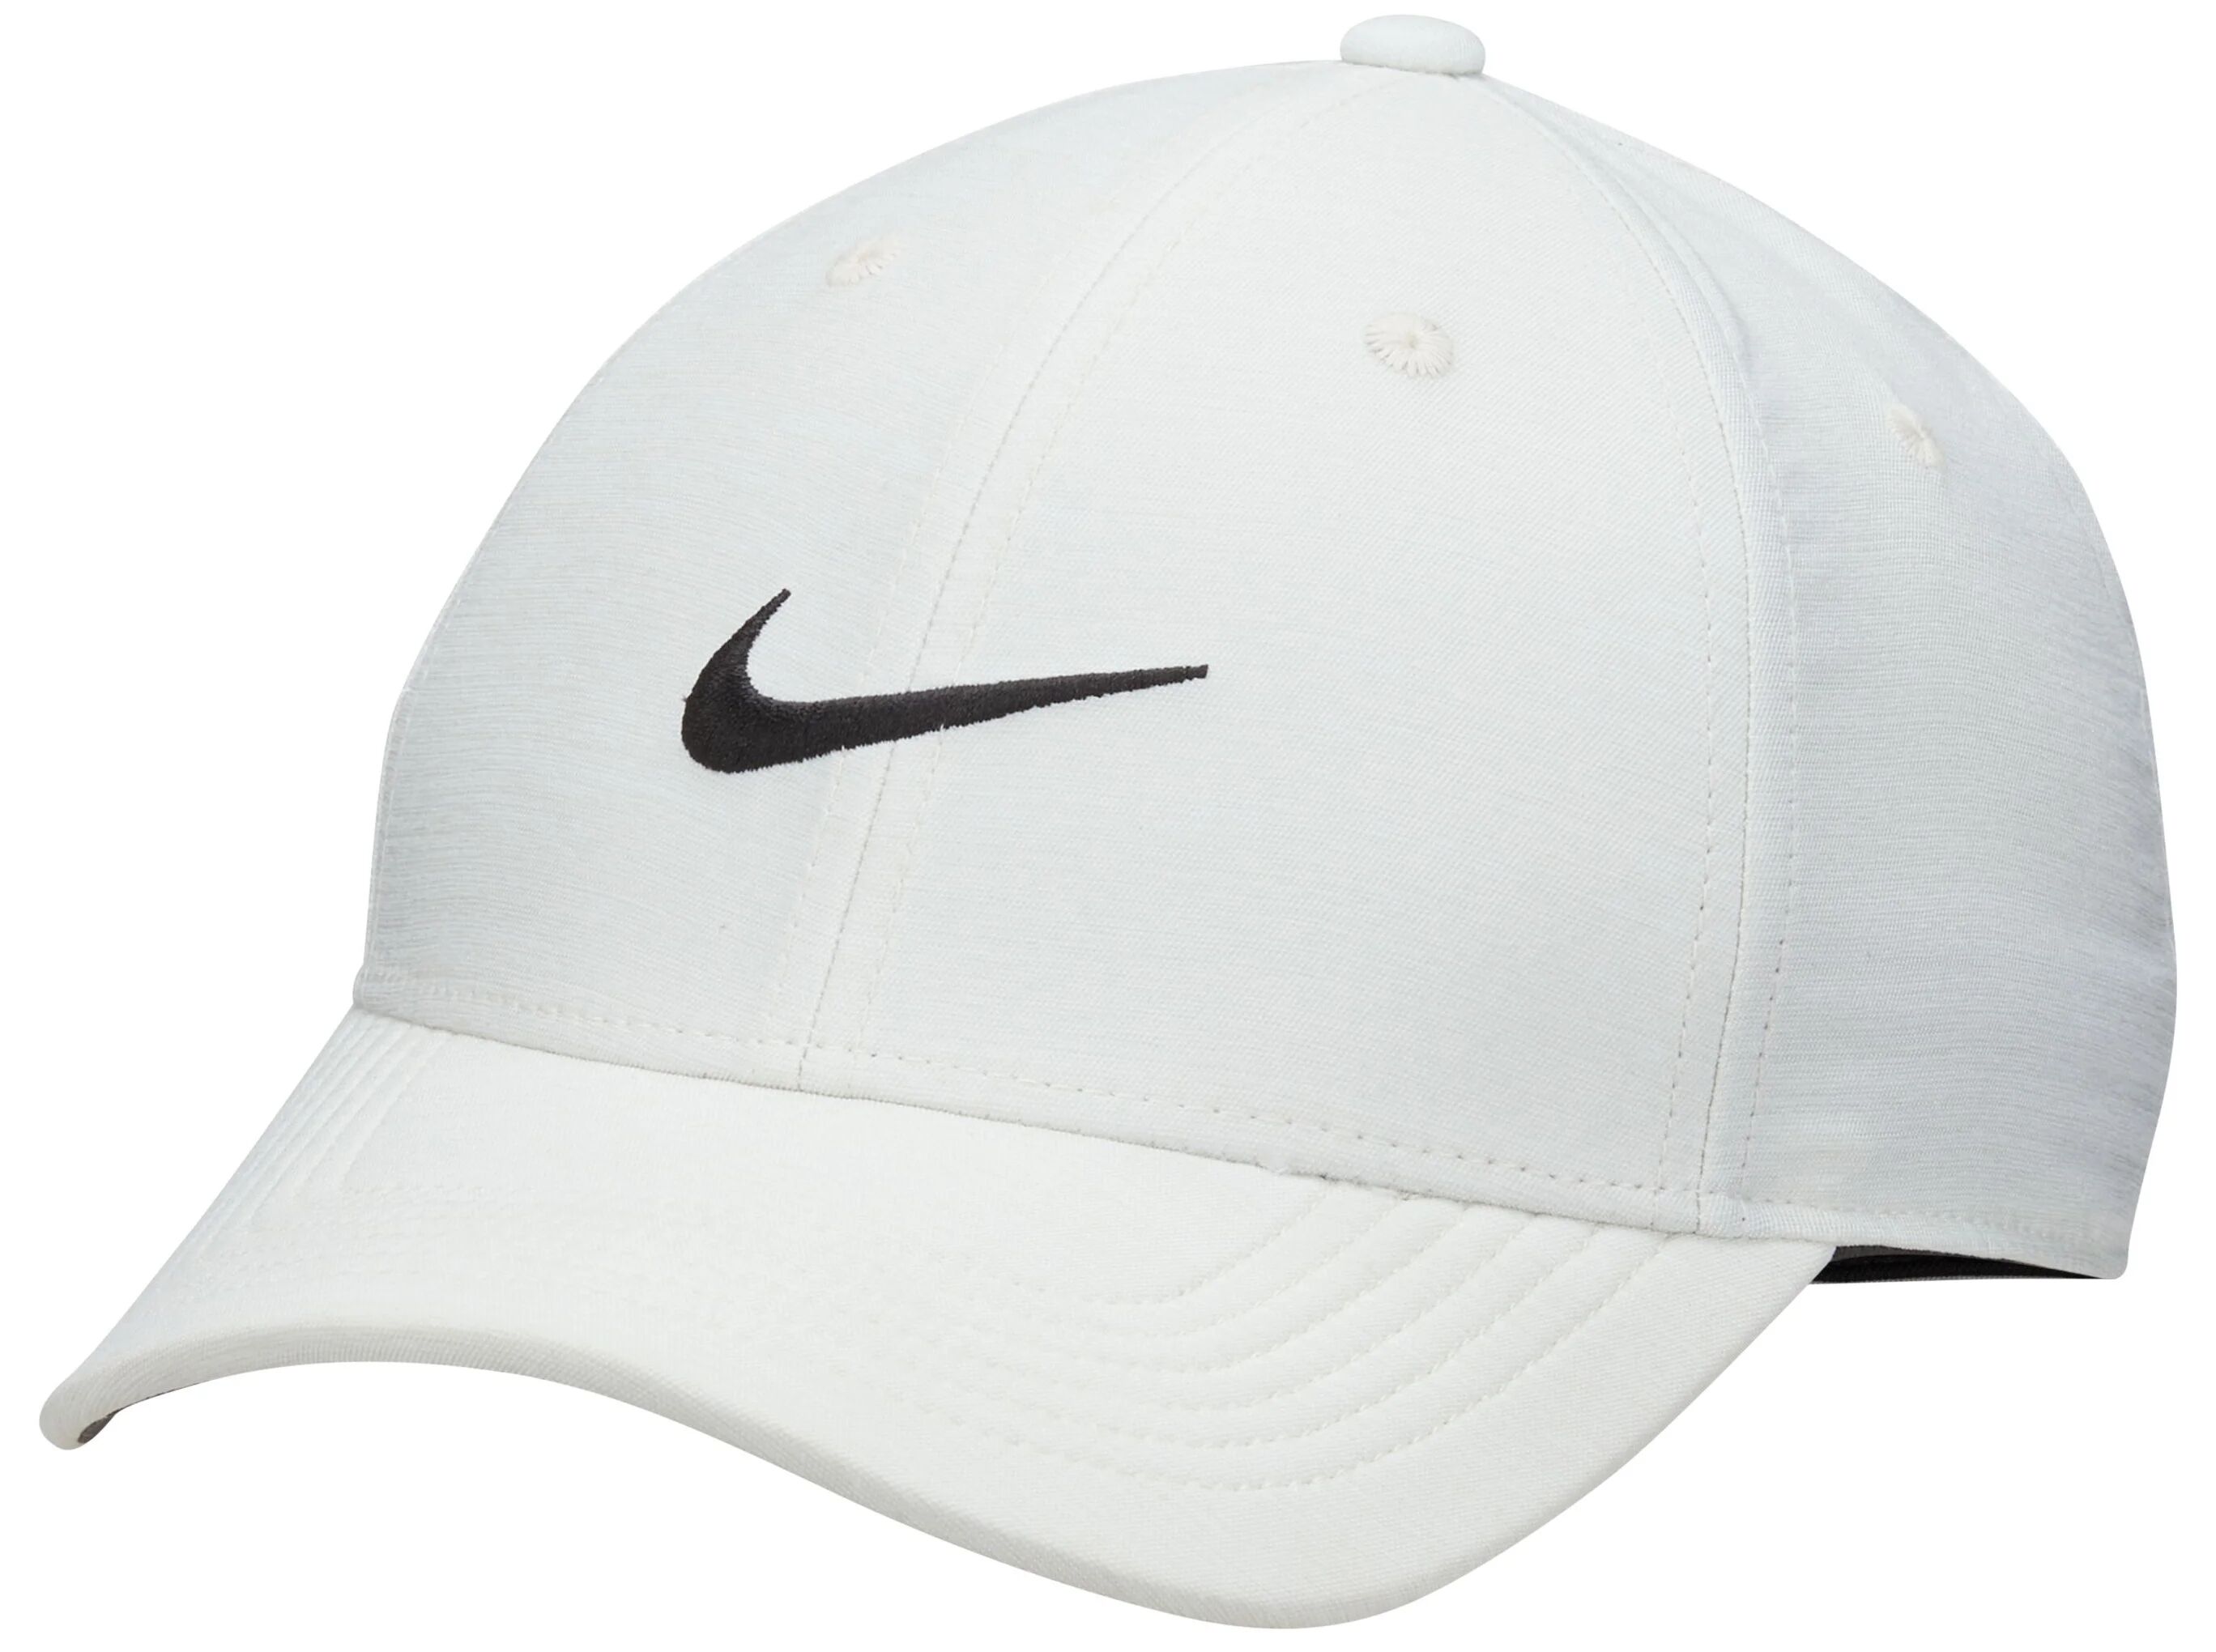 Nike Dri-FIT Club Structured Heathered Men's Golf Hat - White, Size: Large/X-Large